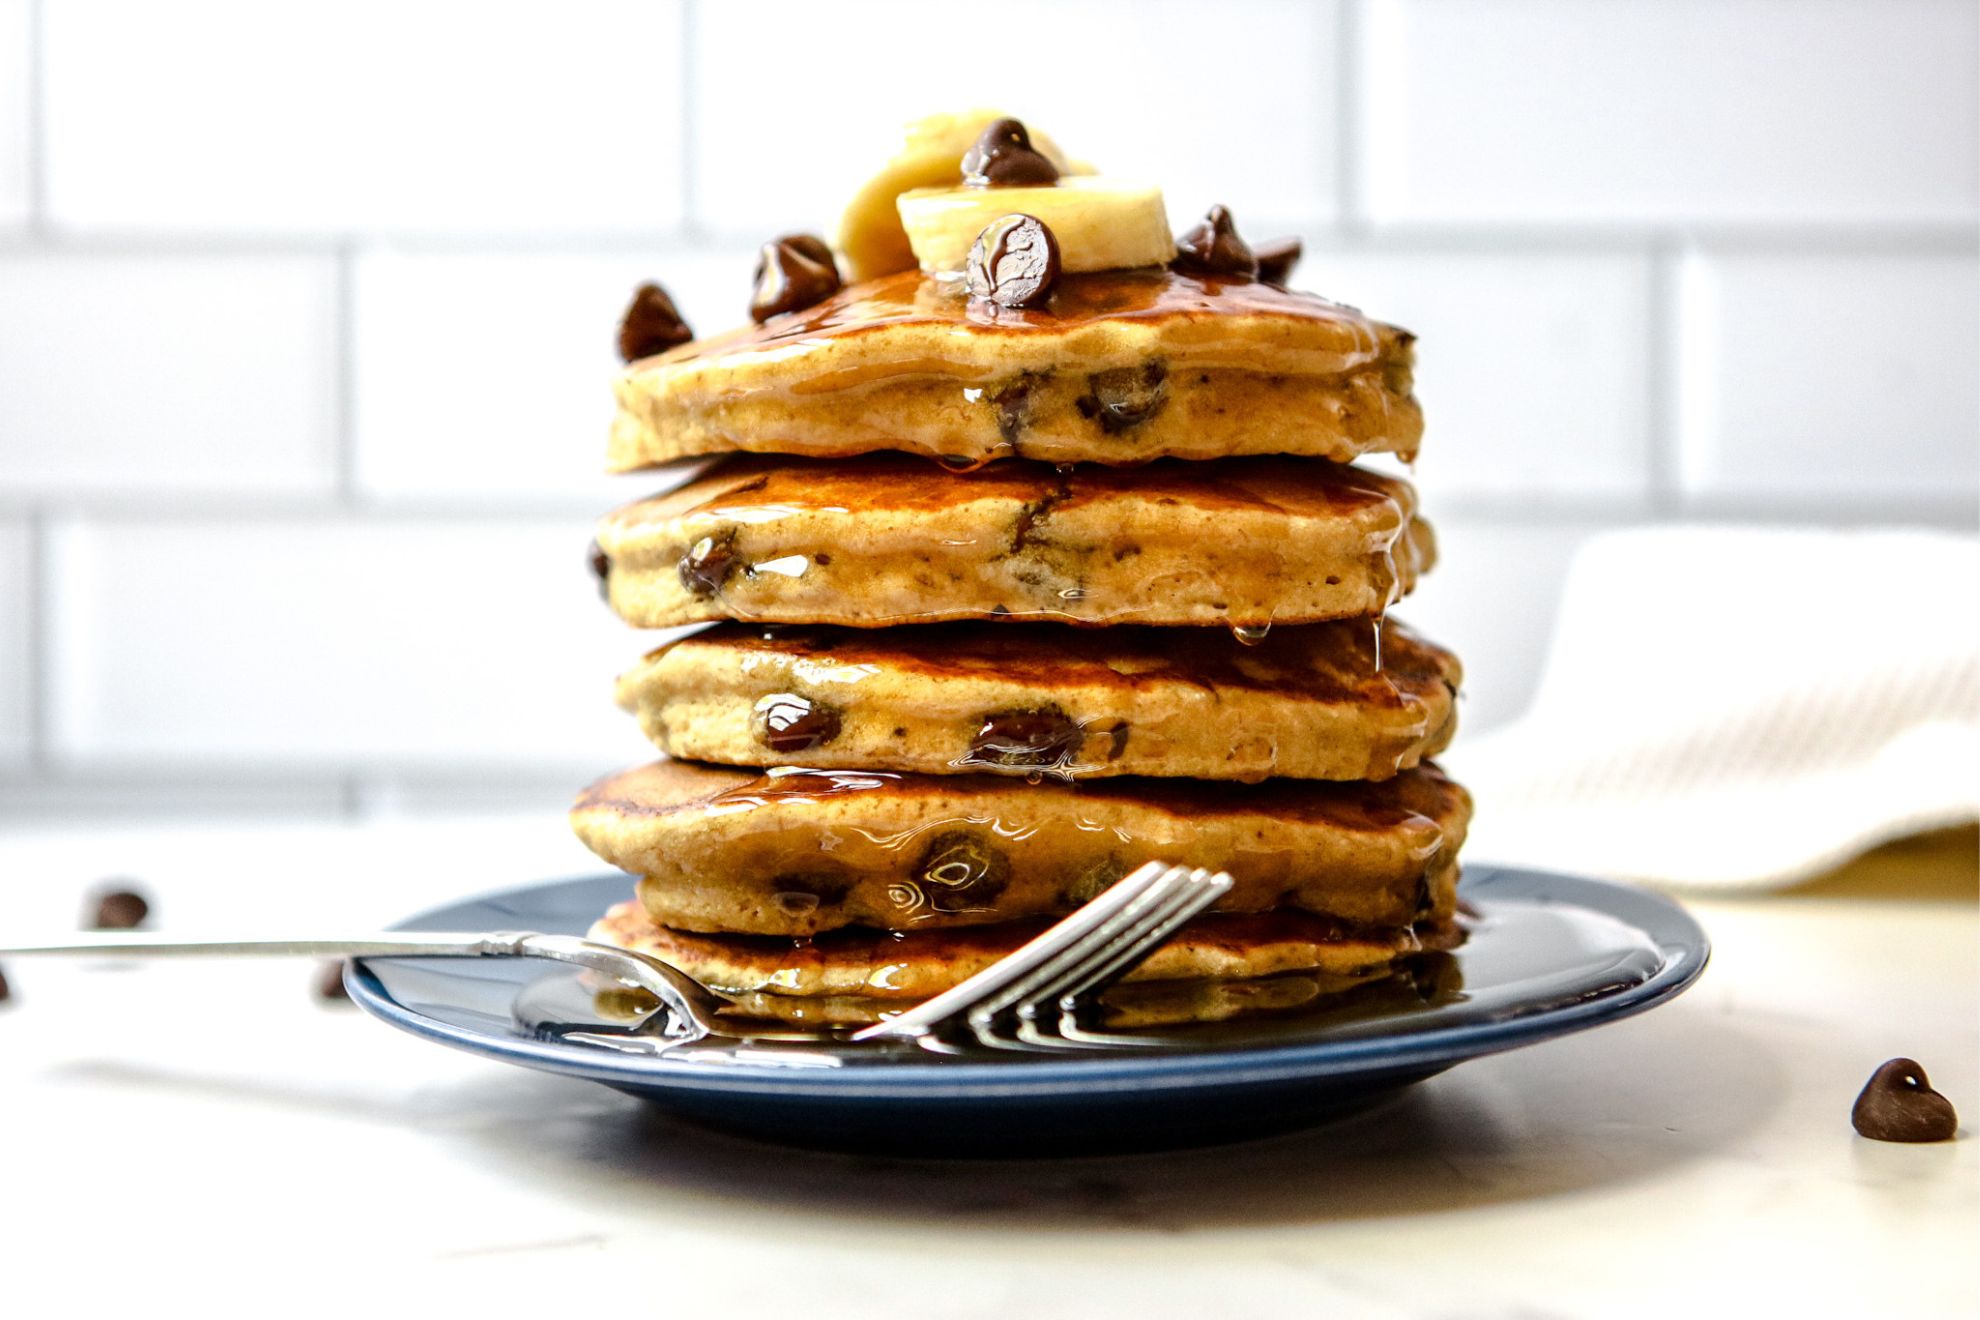 This is a horizontal image of a side view of a stack of chocolate chip pancakes. The stack sits on a dark blue plate with a fork at the bottom of the stack leaning against the side of the plate. The plate sits on a white surface with white subway tile in the background. The stack of pancakes is topped with sliced banana and chocolate chips.